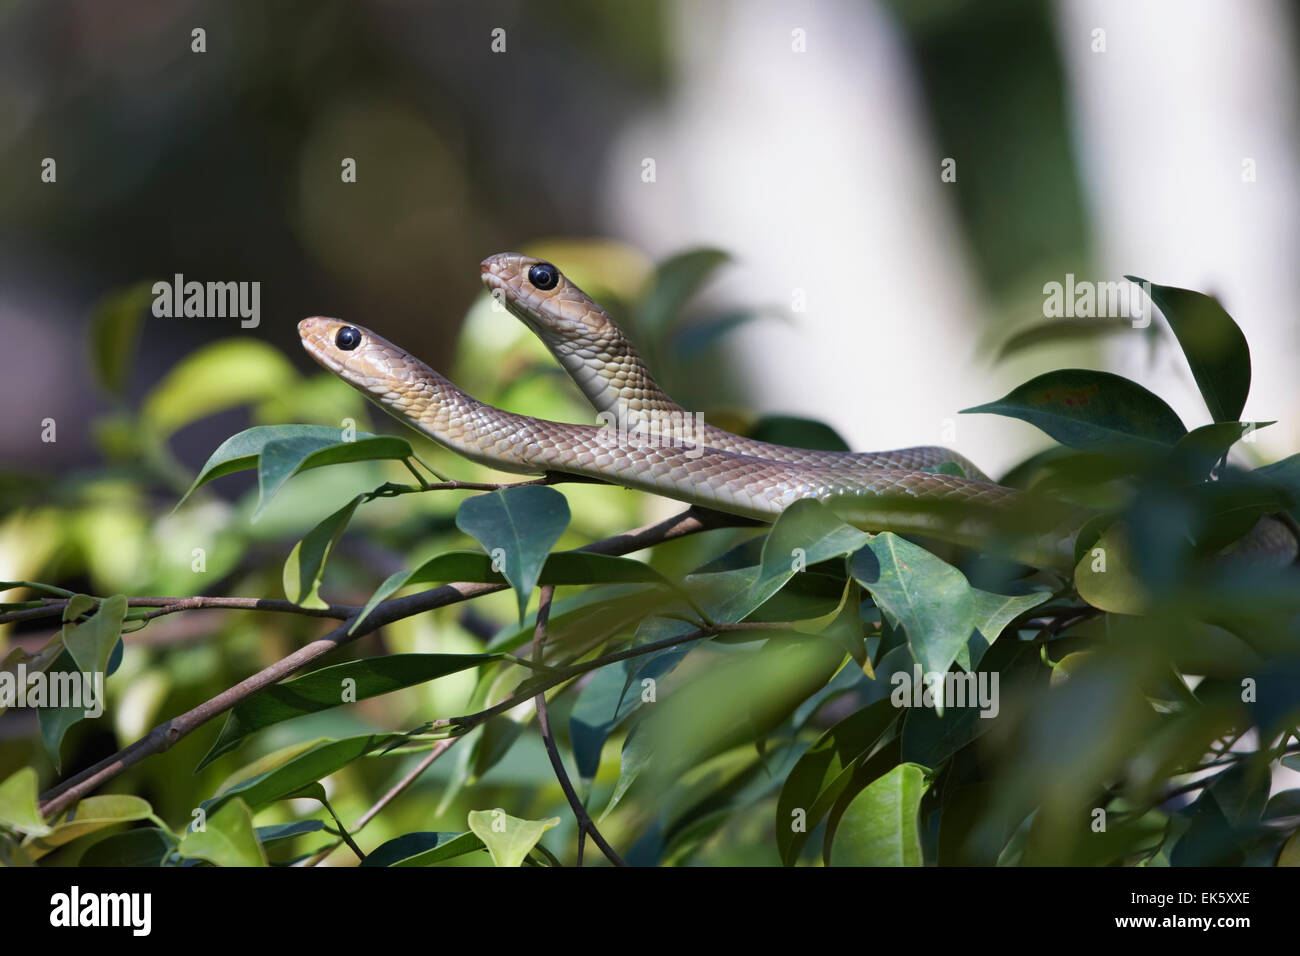 Thailand, Chiang Mai, countryside, snakes on a plant Stock Photo